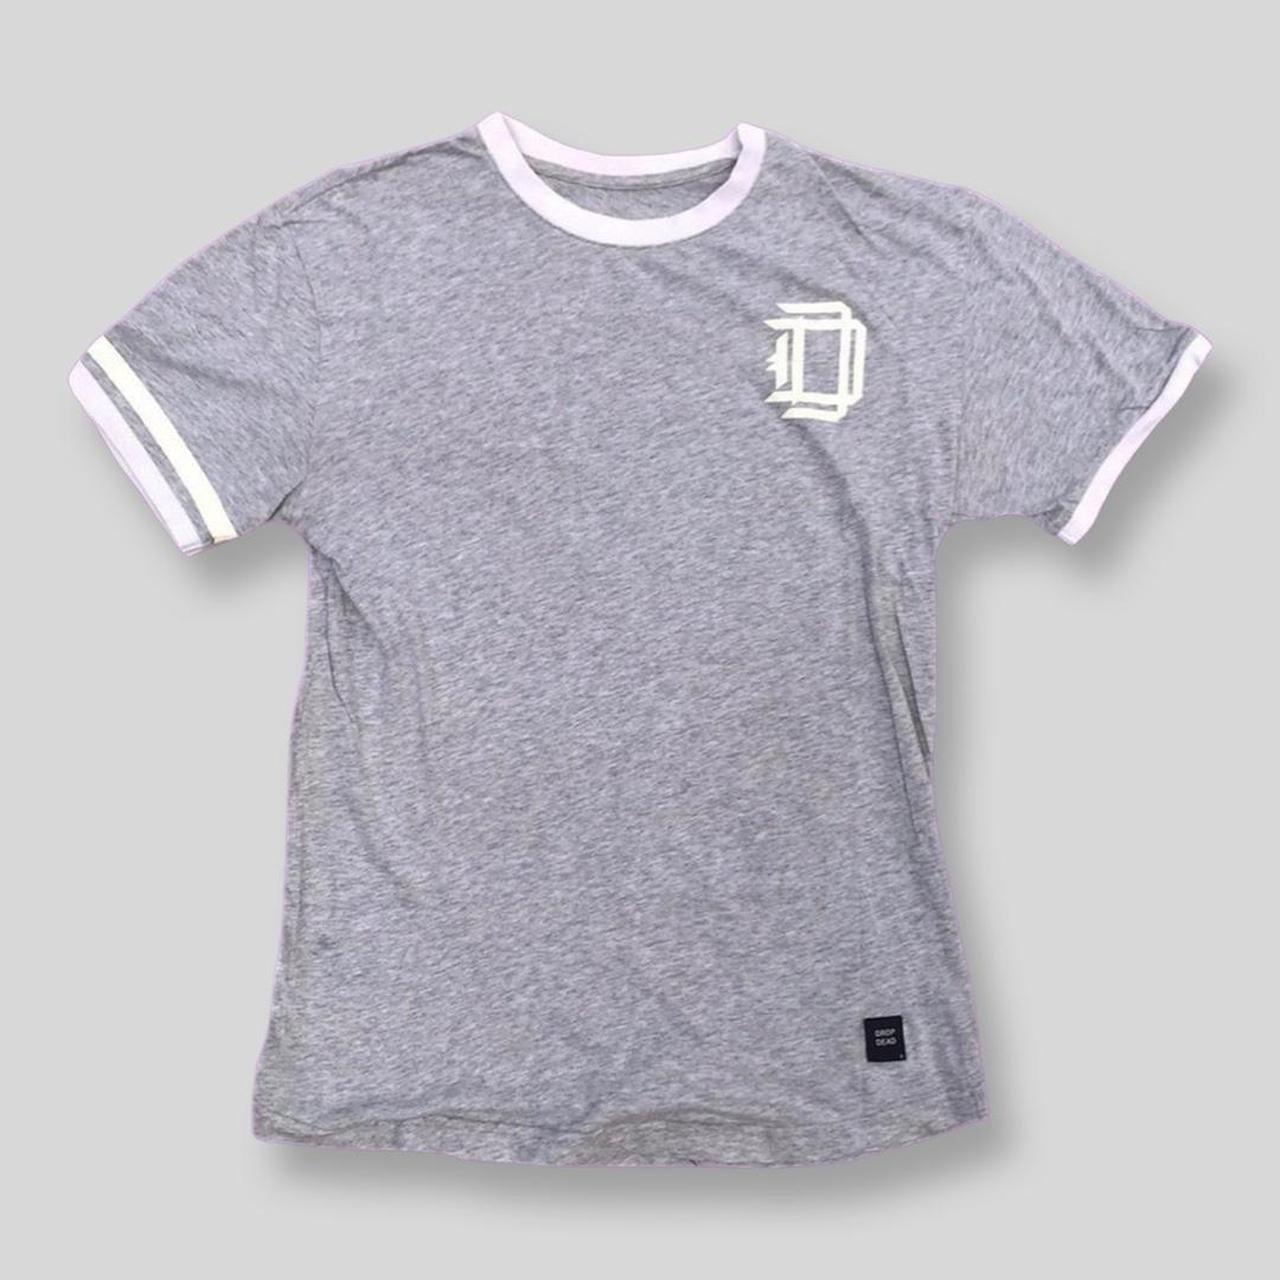 Dropdead Men's Grey and White T-shirt (2)